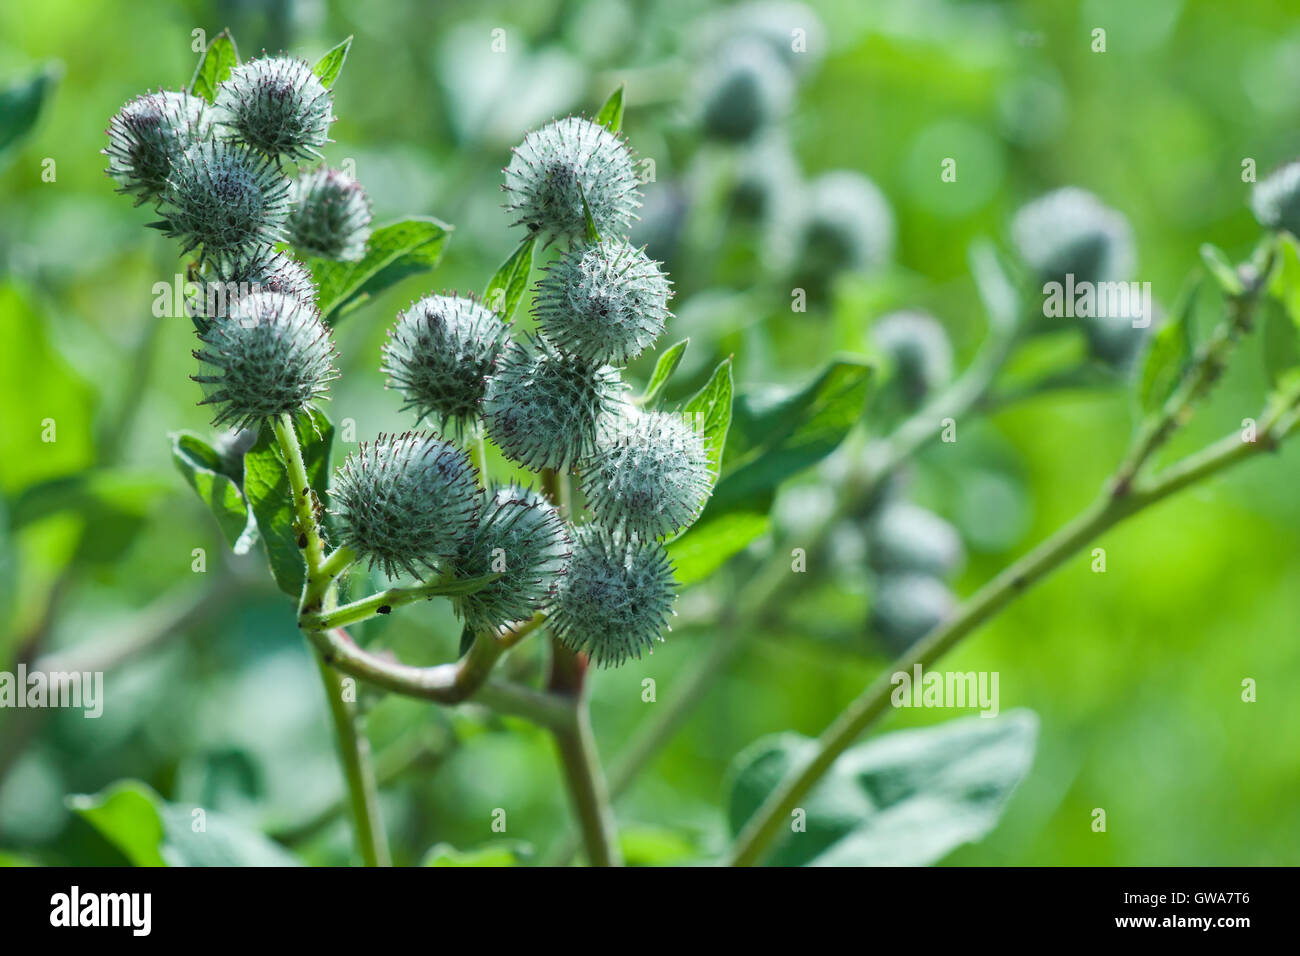 Natural environmental seasonal image: burdock (agrimony) plant closeup with green background of other plants. Stock Photo